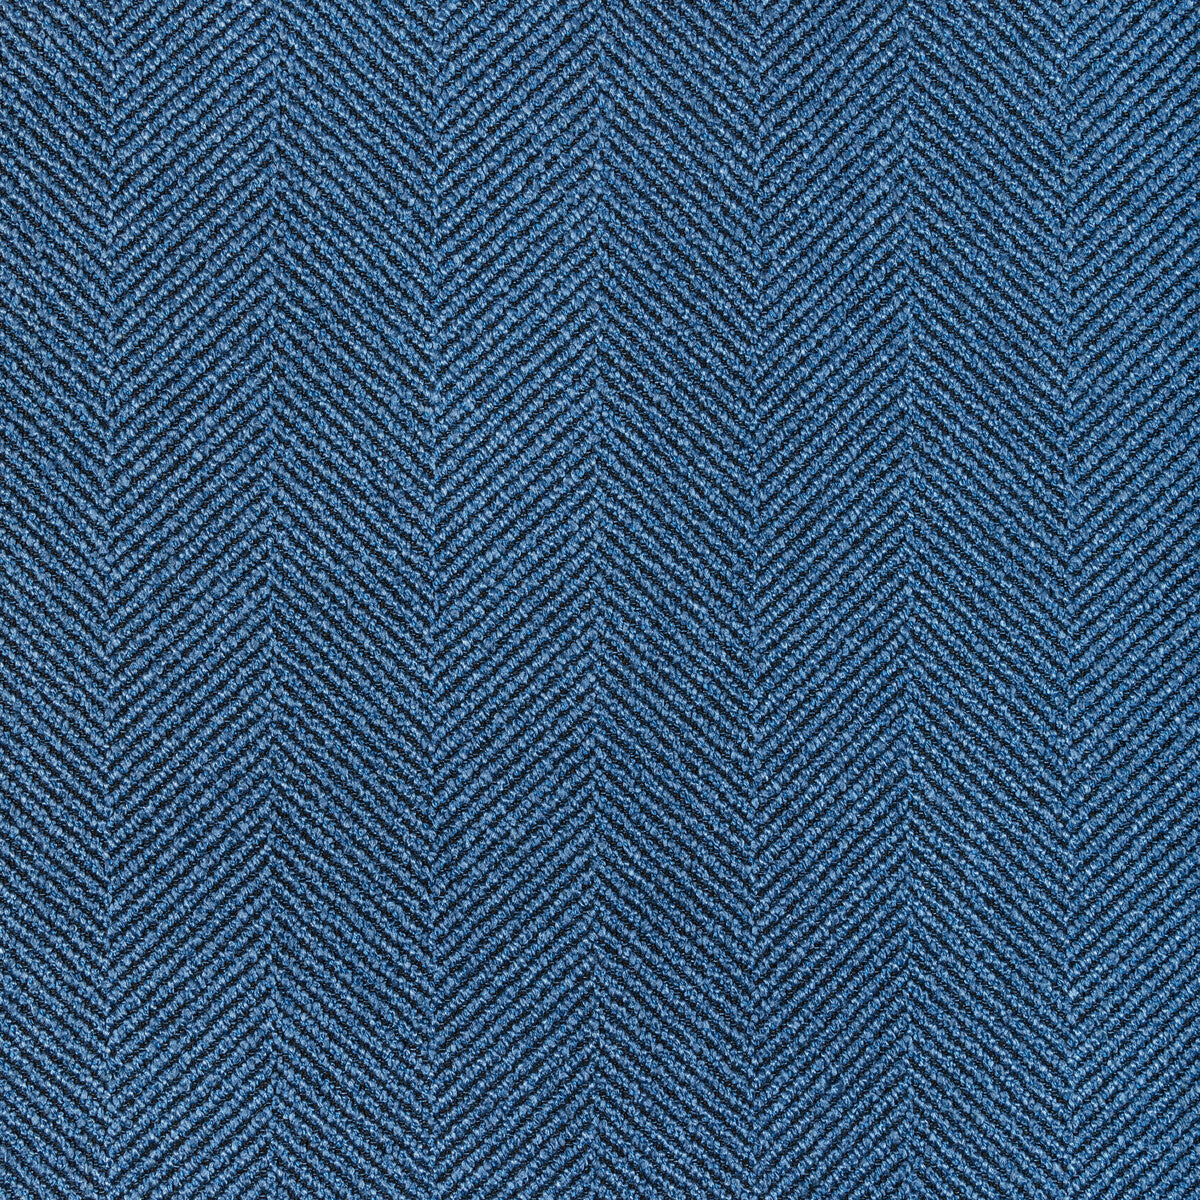 Reprise fabric in lapis color - pattern 36568.515.0 - by Kravet Contract in the Seaqual collection